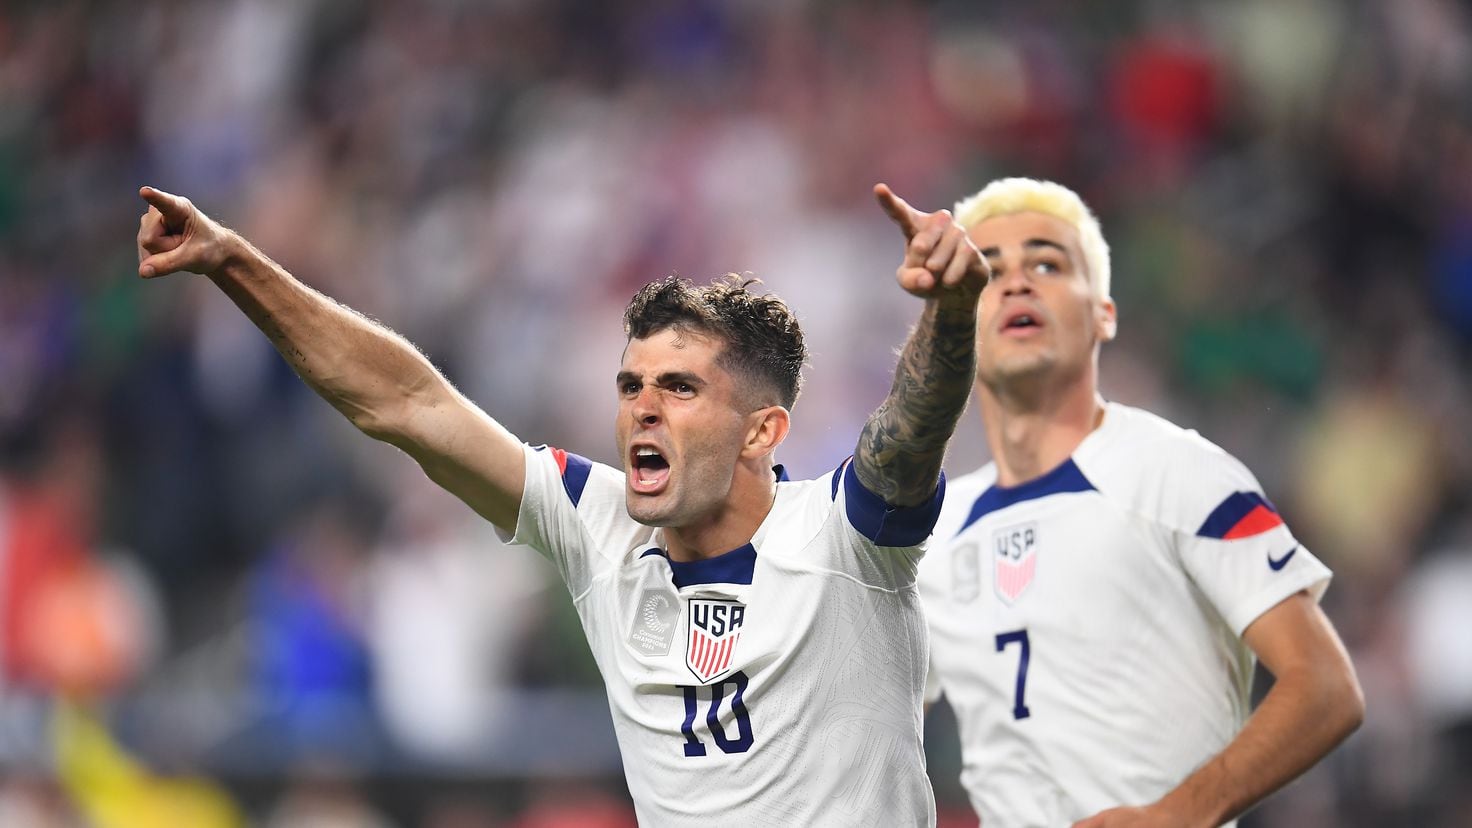 The United States, the “Concacaf giant” that celebrates four years without losing to Mexico